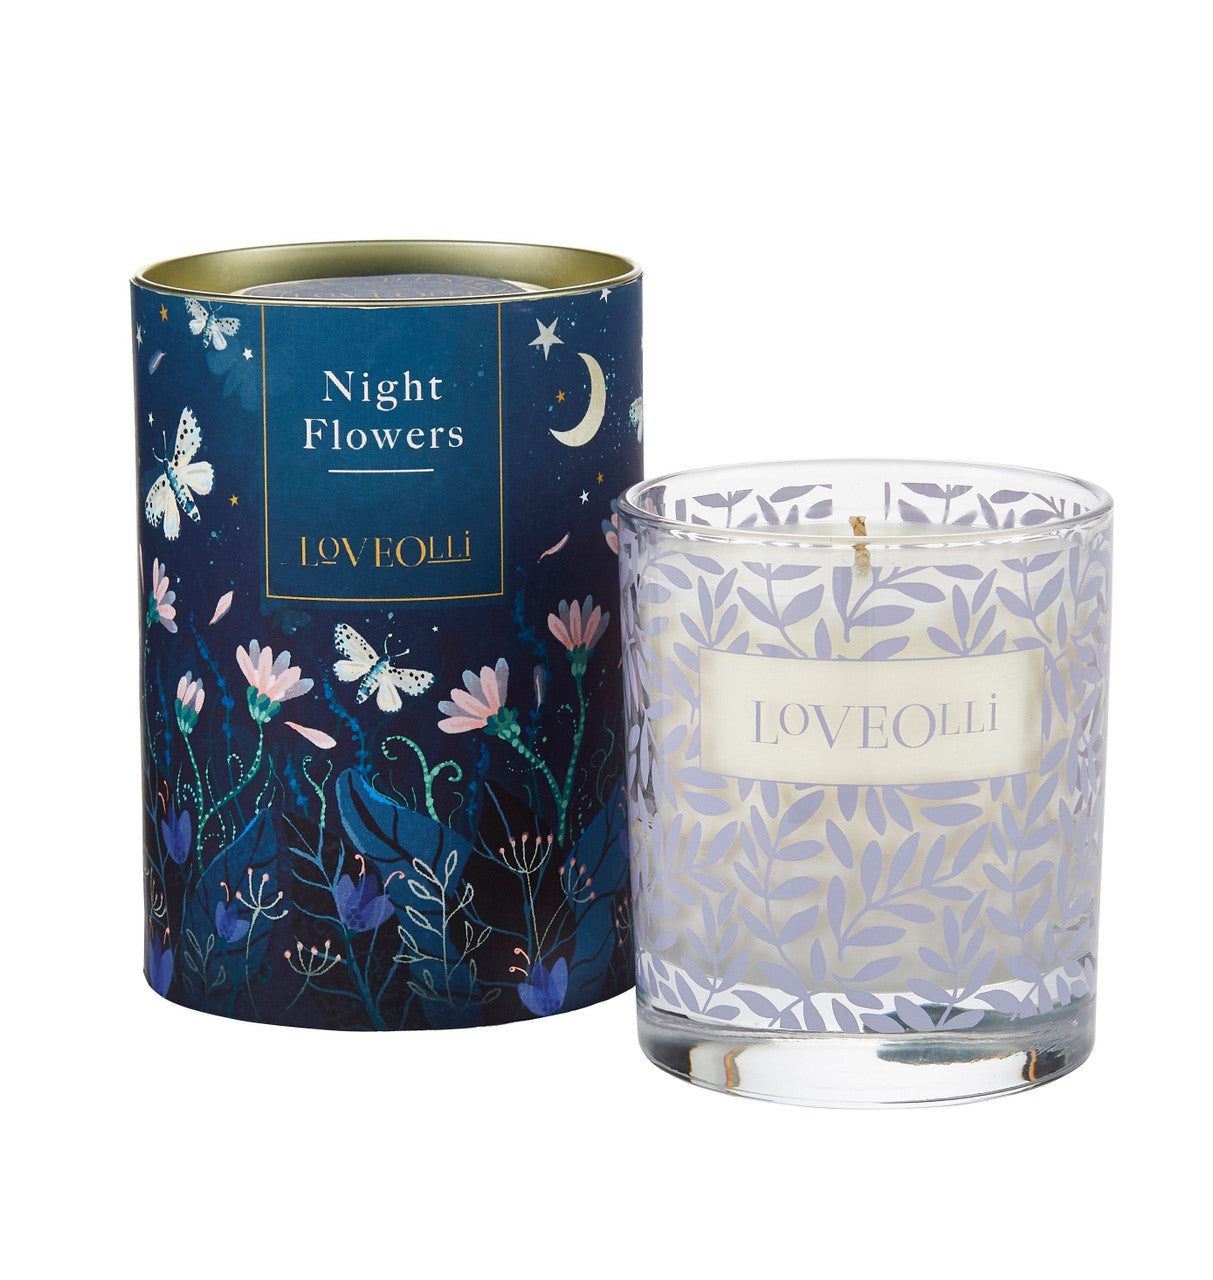 Love Olli Night Flowers scented candle in glass. Hand poured in the UK.